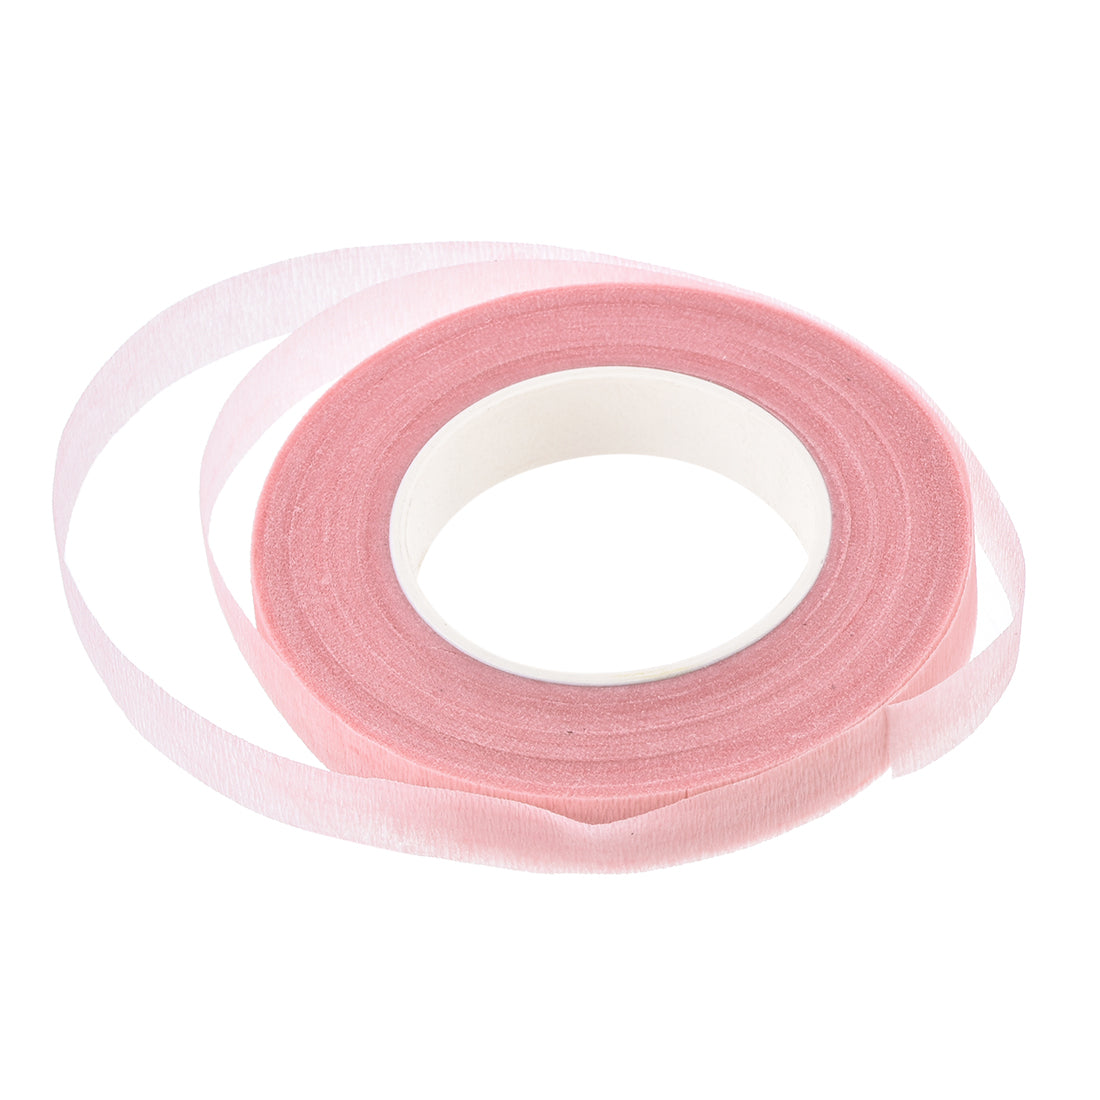 uxcell Uxcell 4Roll 1/2"x30Yard Pink Floral Tape Flower Adhesives Floral Arrangement Kit